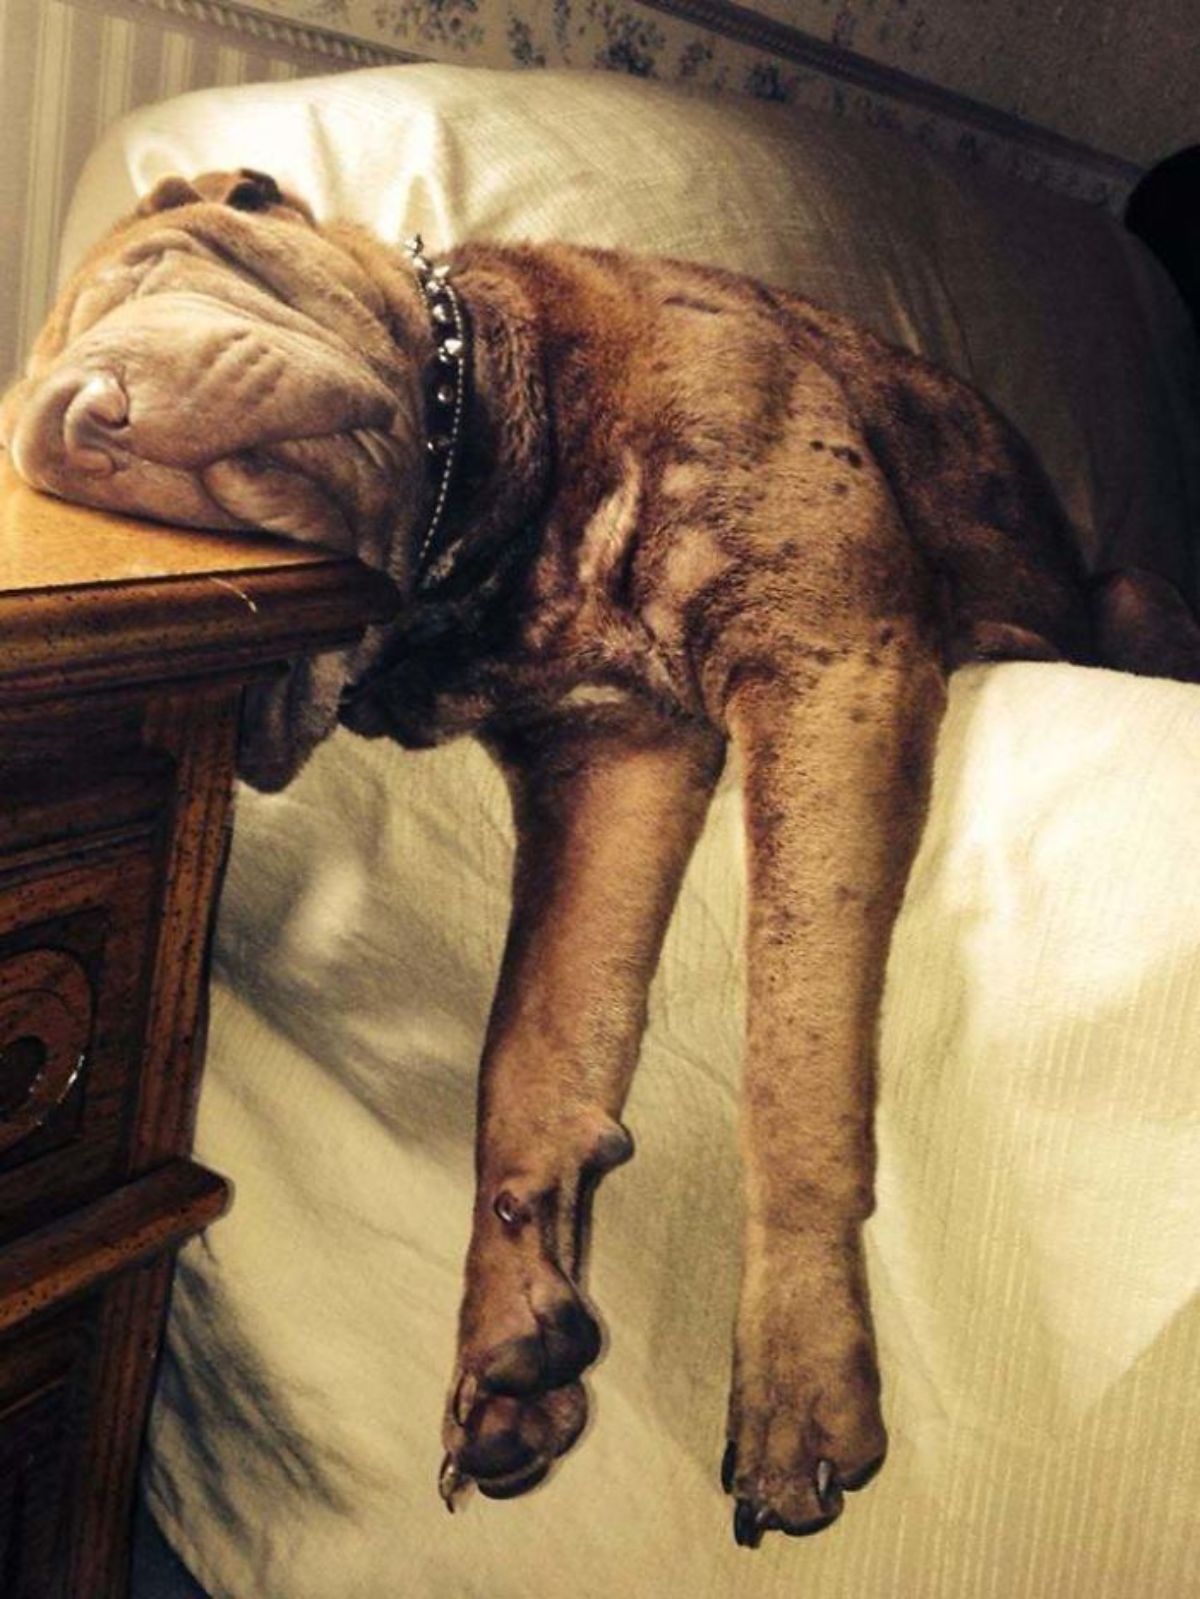 brown dog sleeping on a bed with the face on a bedside drawer